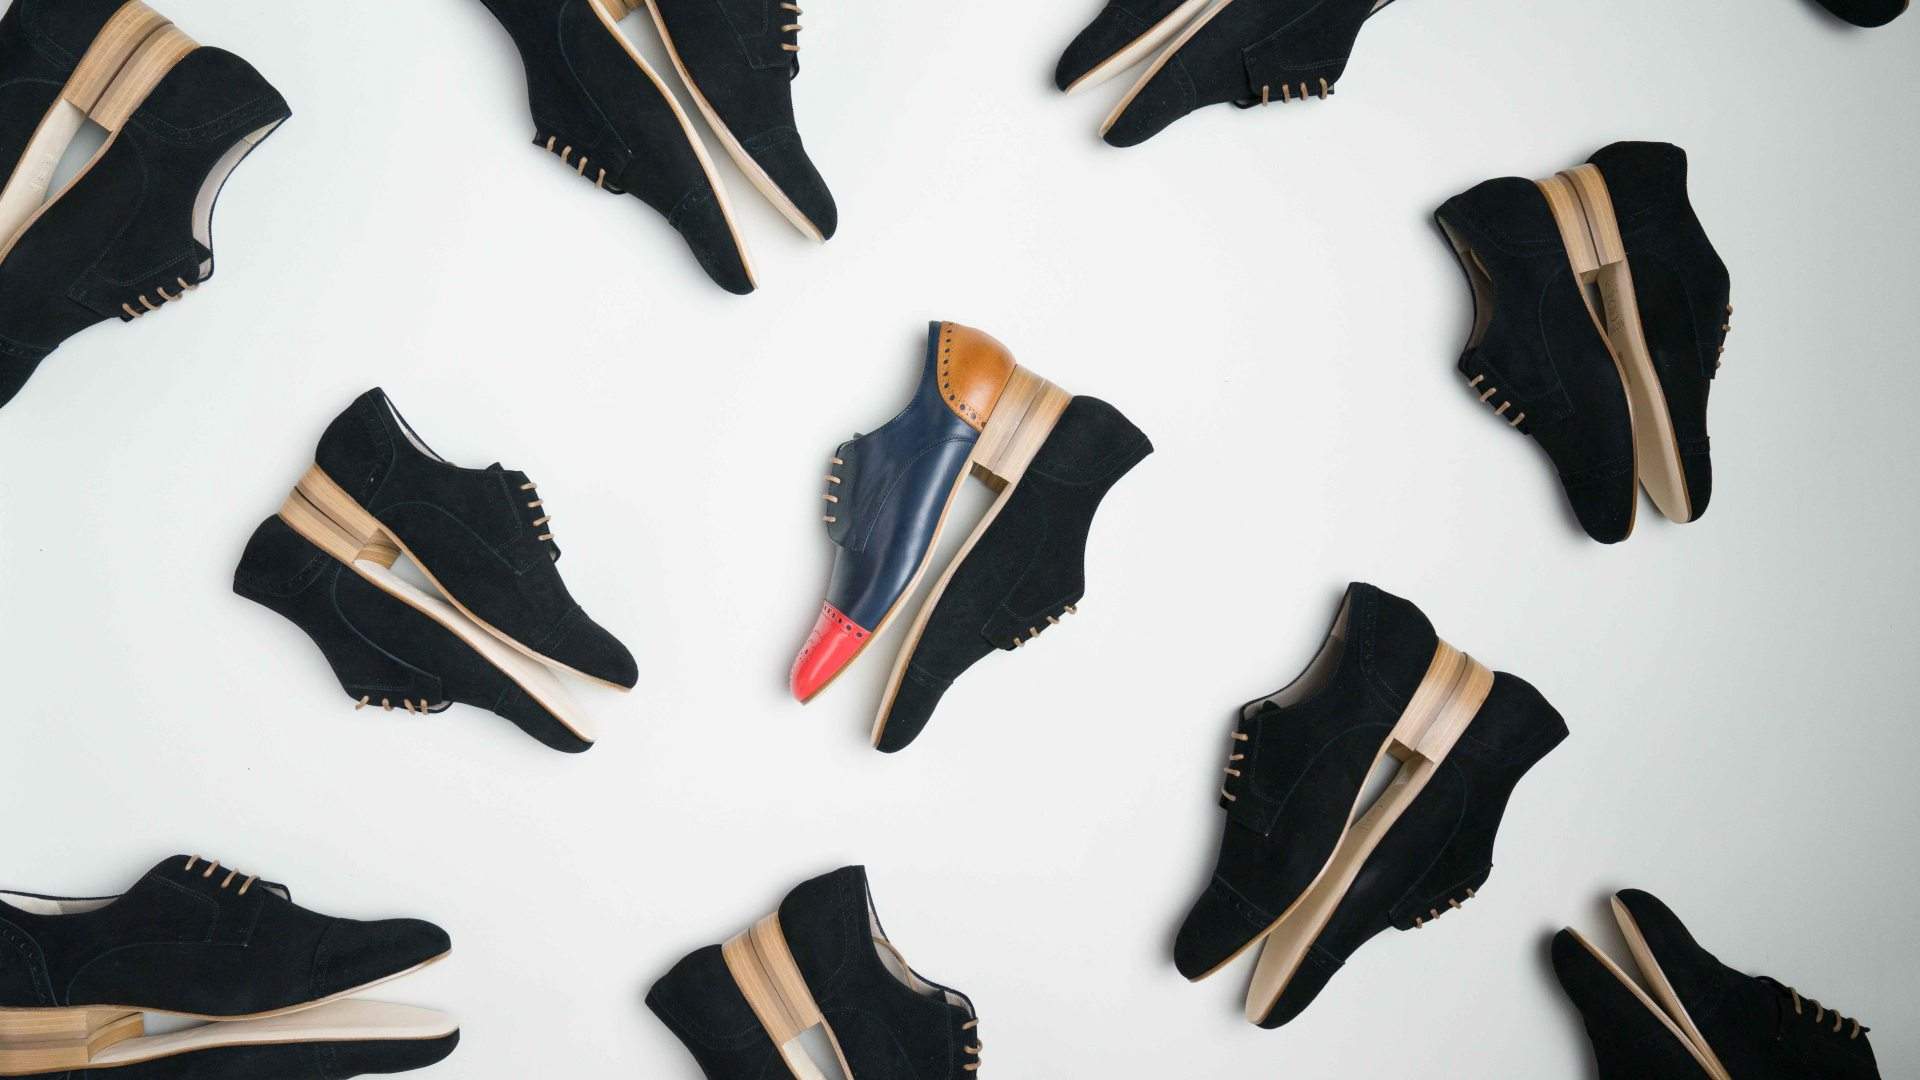 Design Your Own Pair of Shoes with Habbot's New Online Platform